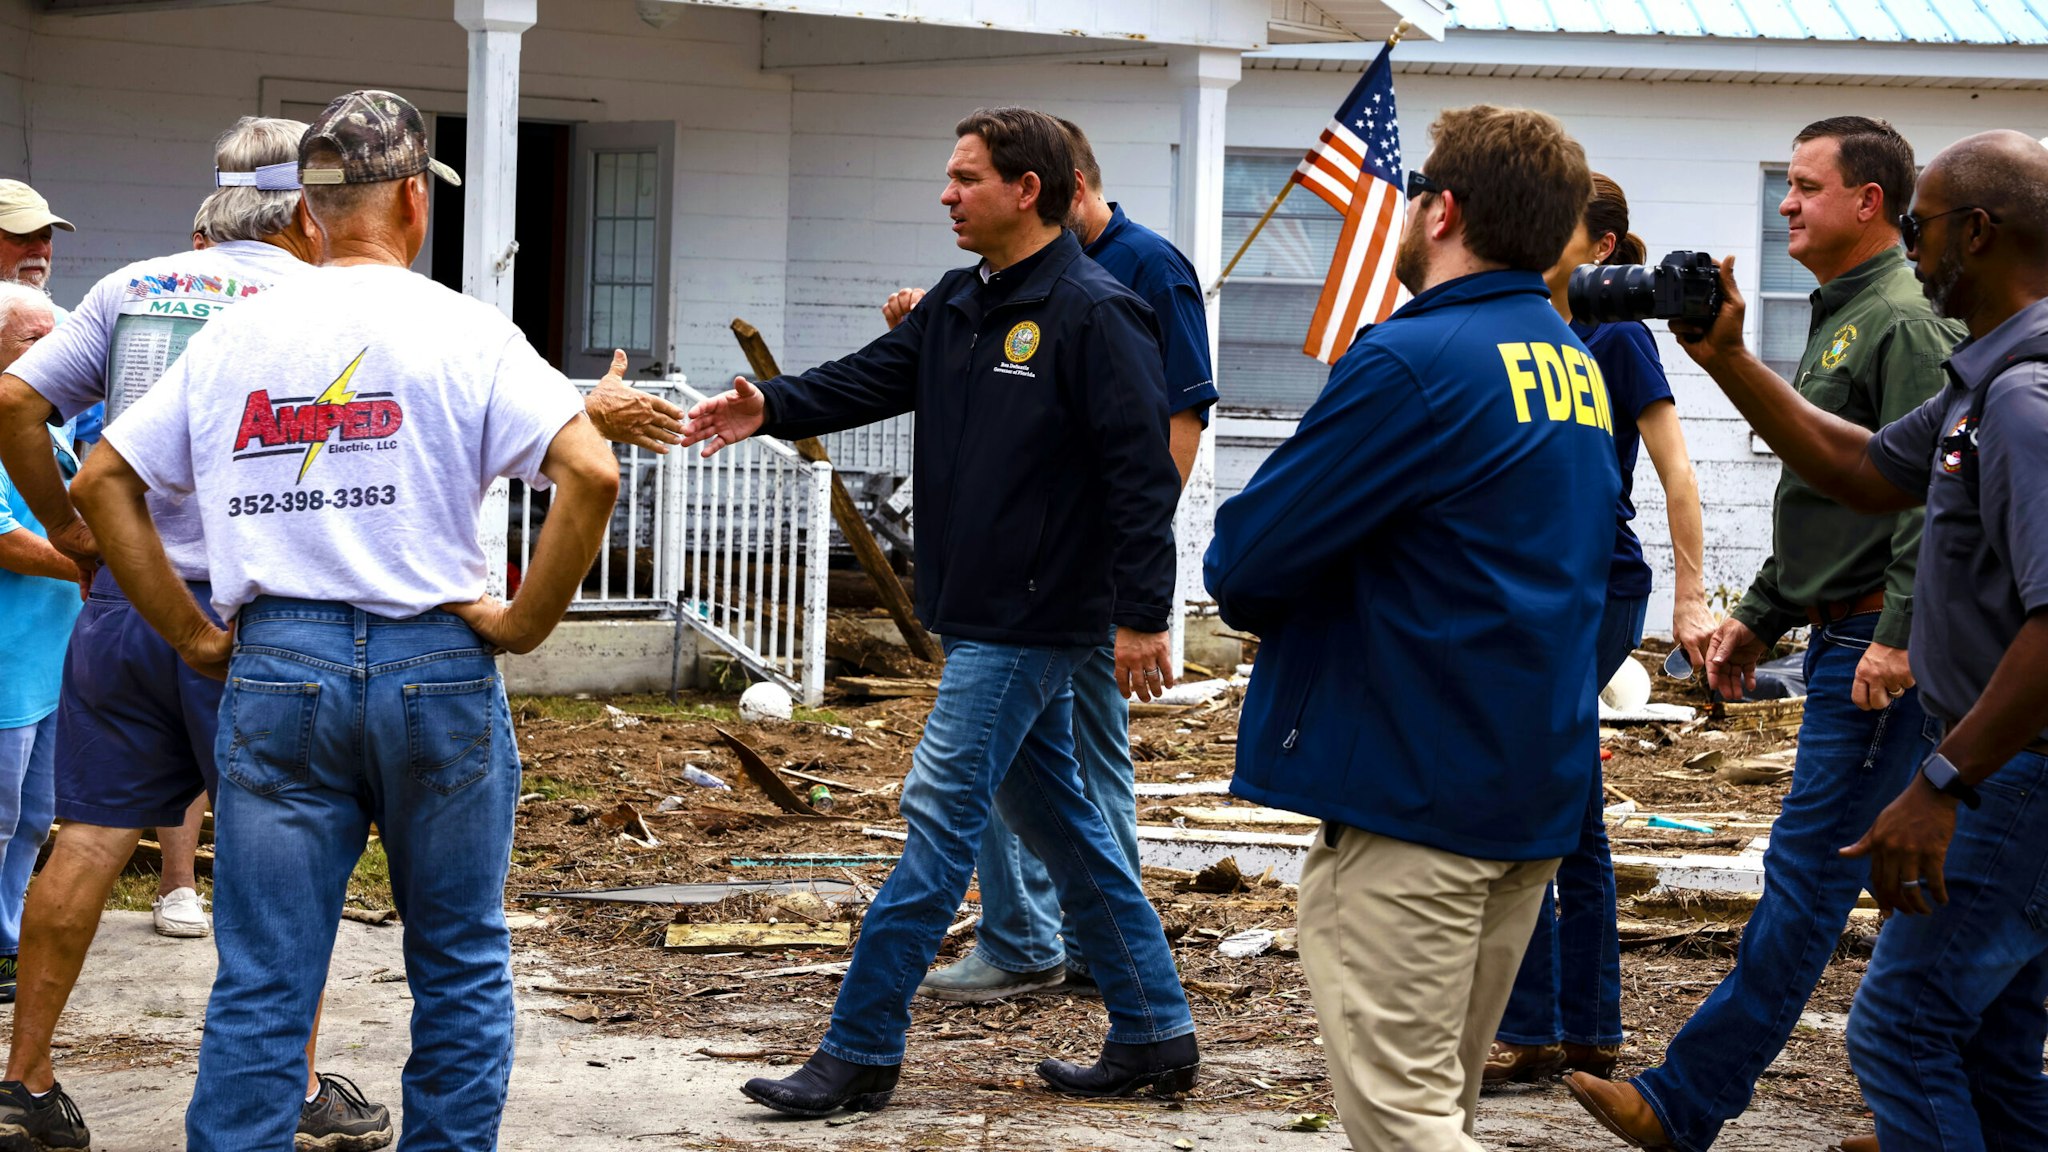 Ron DeSantis, governor of Florida and 2024 Republican presidential candidate, center, shakes hands with residents during a visit after Hurricane Idalia in Horseshoe Beach, Florida, US, on Thursday, Aug. 31, 2023. Florida has started to dig out from the aftermath of Idalia, which weakened to a tropical storm even as it brought heavy rain across Georgia and the Carolinas, caused billions of dollars in damage, left hundreds of flights grounded and thousands without power.